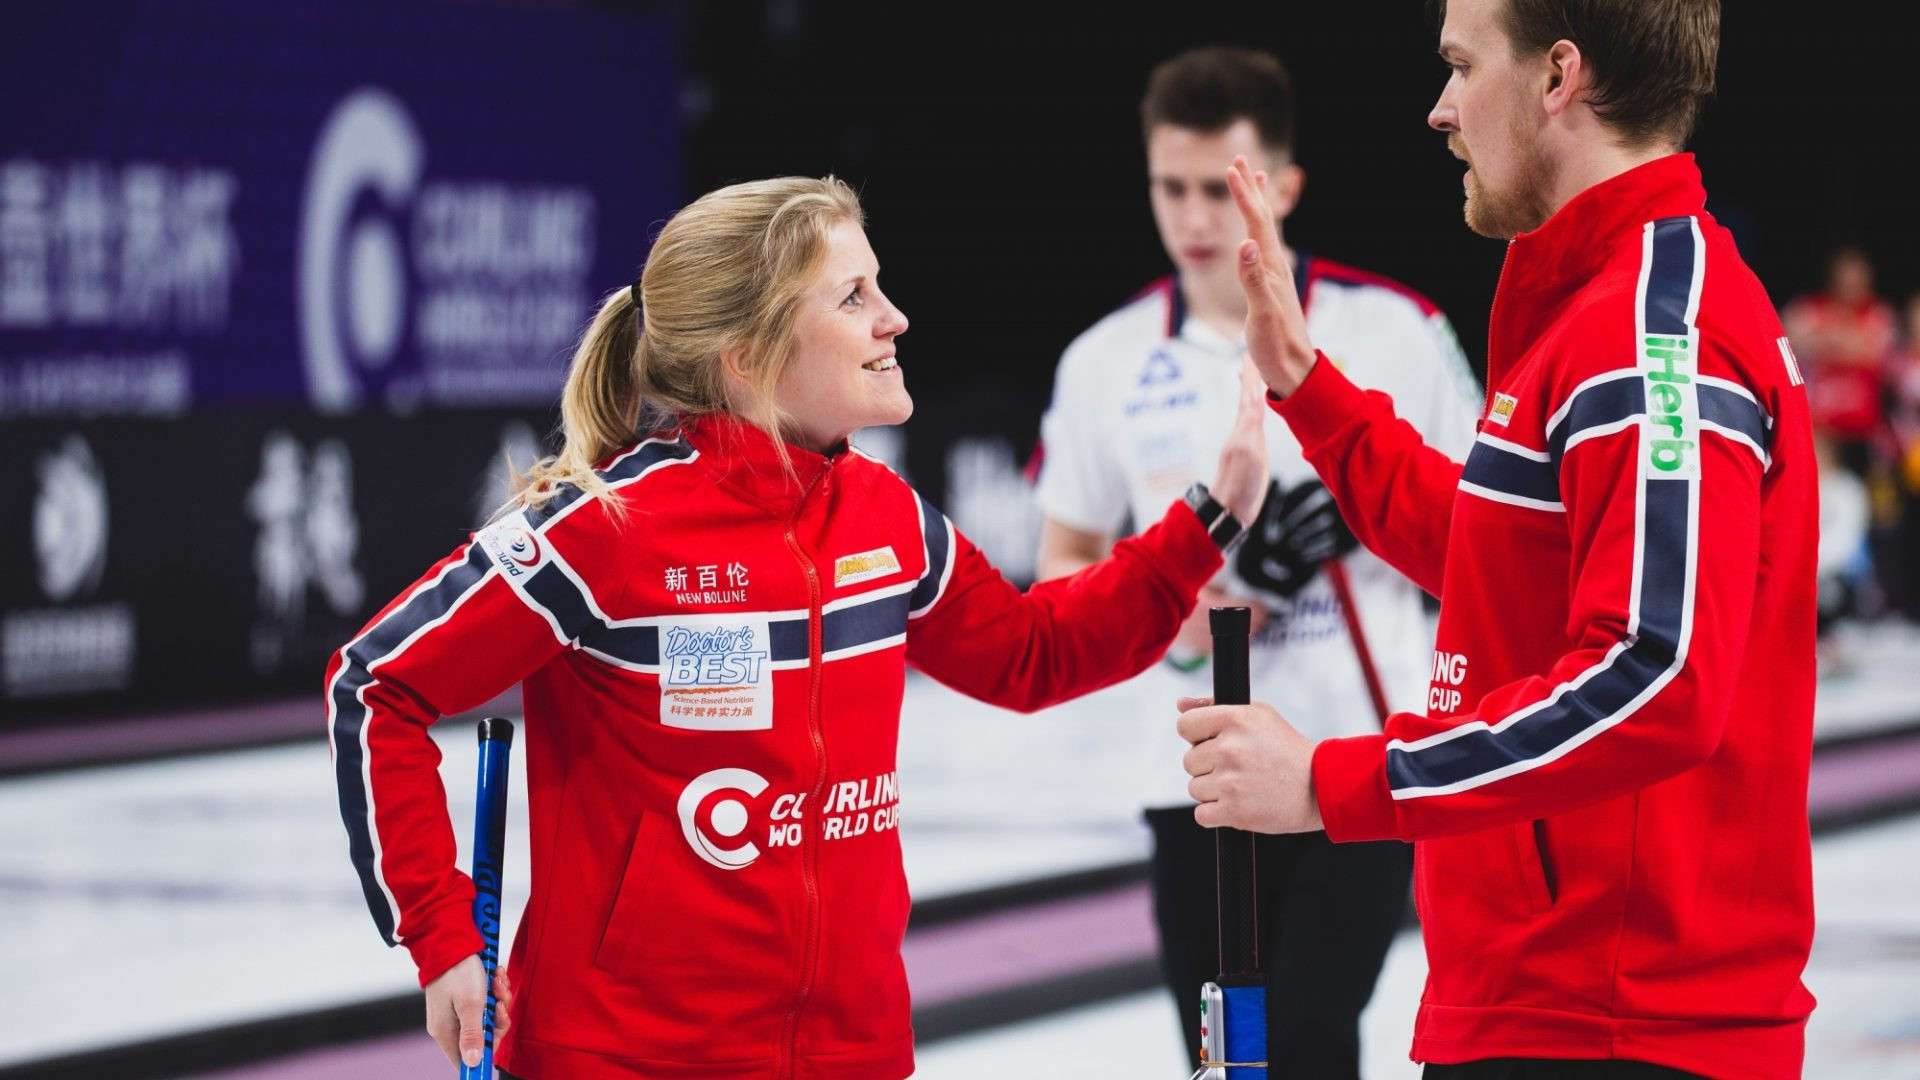 Norway’s Magnus Nedregotten and Kristen Skaslien built on their fine victory on day on by producing a controlled display to beat Russia’s Maria Komarova and Daniil Goriachev  ©World Curling Federation